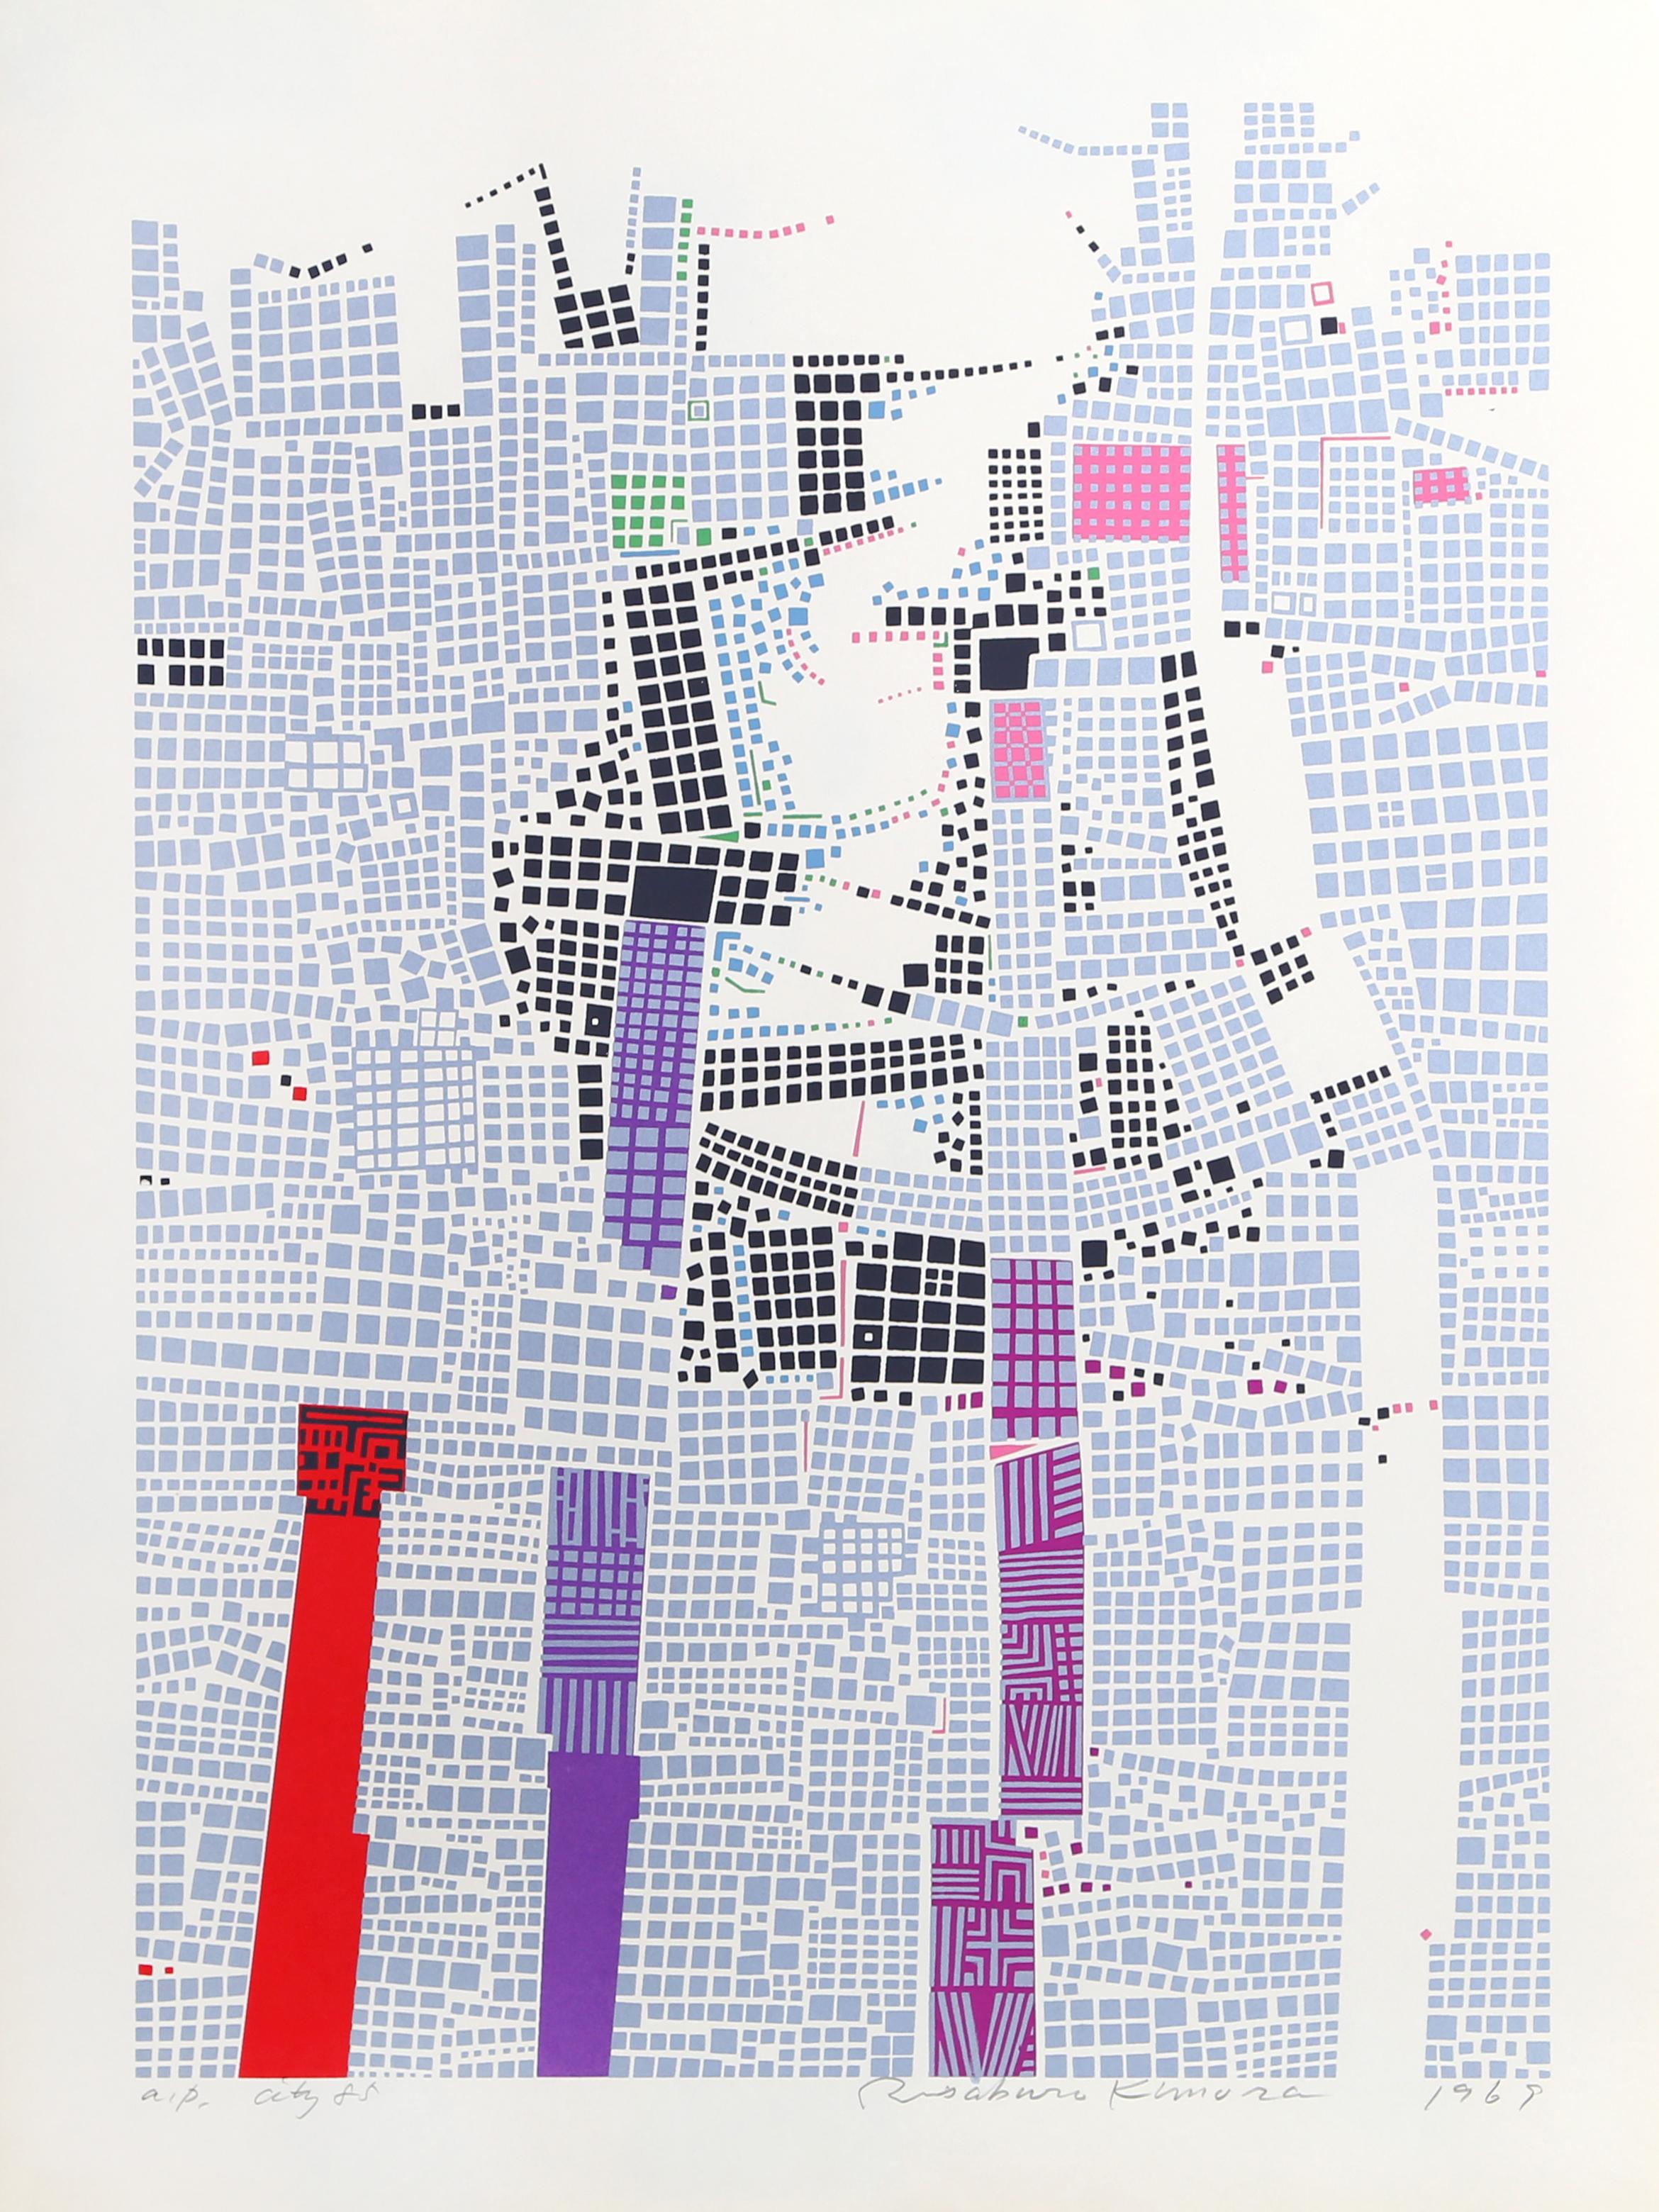 Artist: Risaburo Kimura, Japanese (1924 - )
Title: City 85
Year: 1969
Medium: Serigraph, signed and numbered in pencil
Edition: AP
Image Size: 25 x 20 inches
Size: 25 in. x 19 in. (63.5 cm x 48.26 cm)